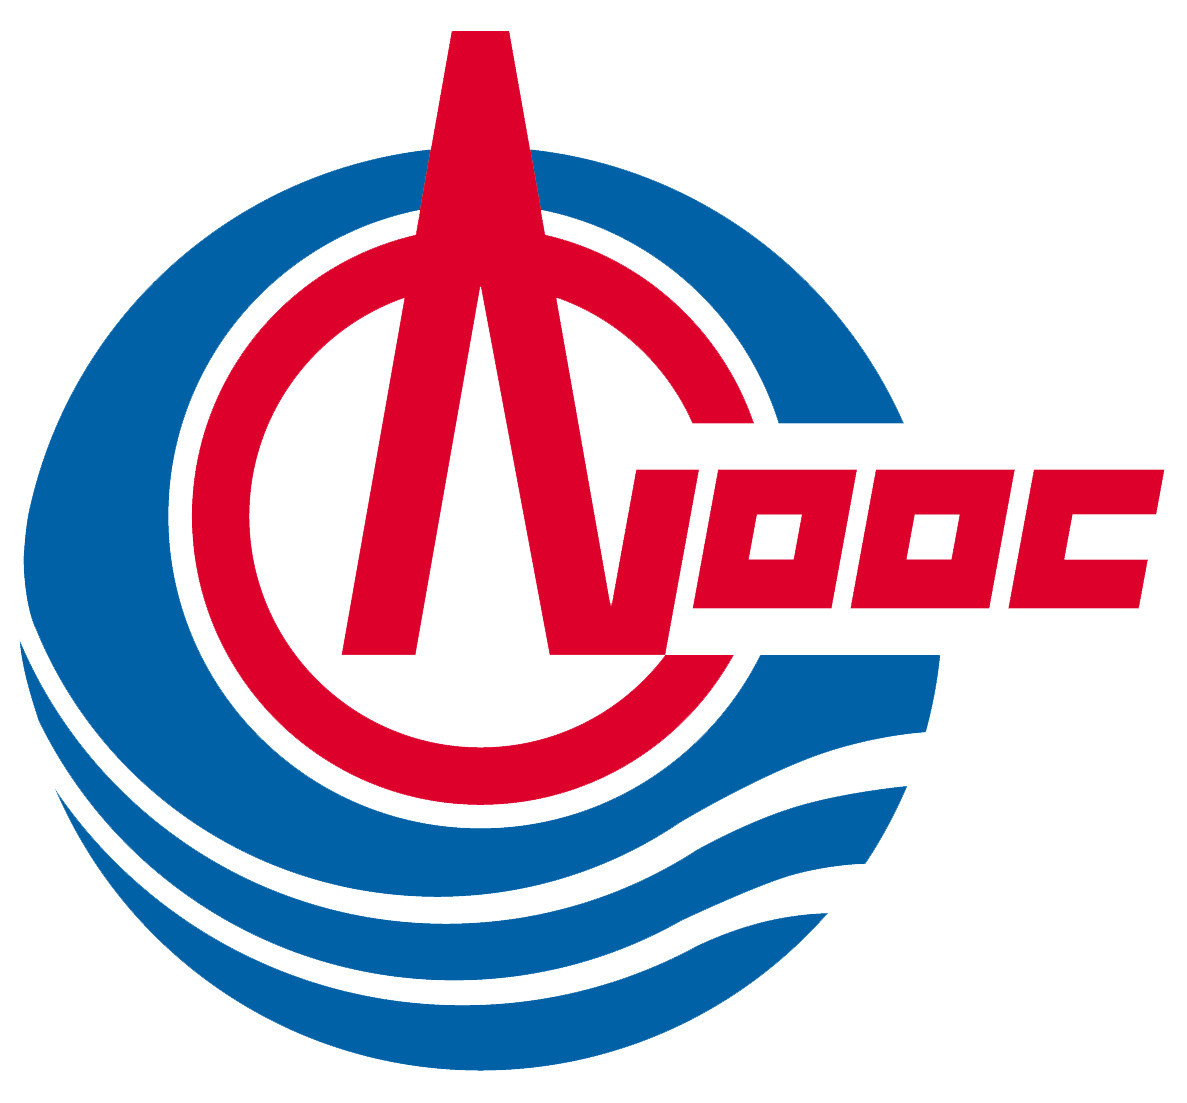 CNOOC Limited Announces Its 2023 Business Strategy and Development Plan